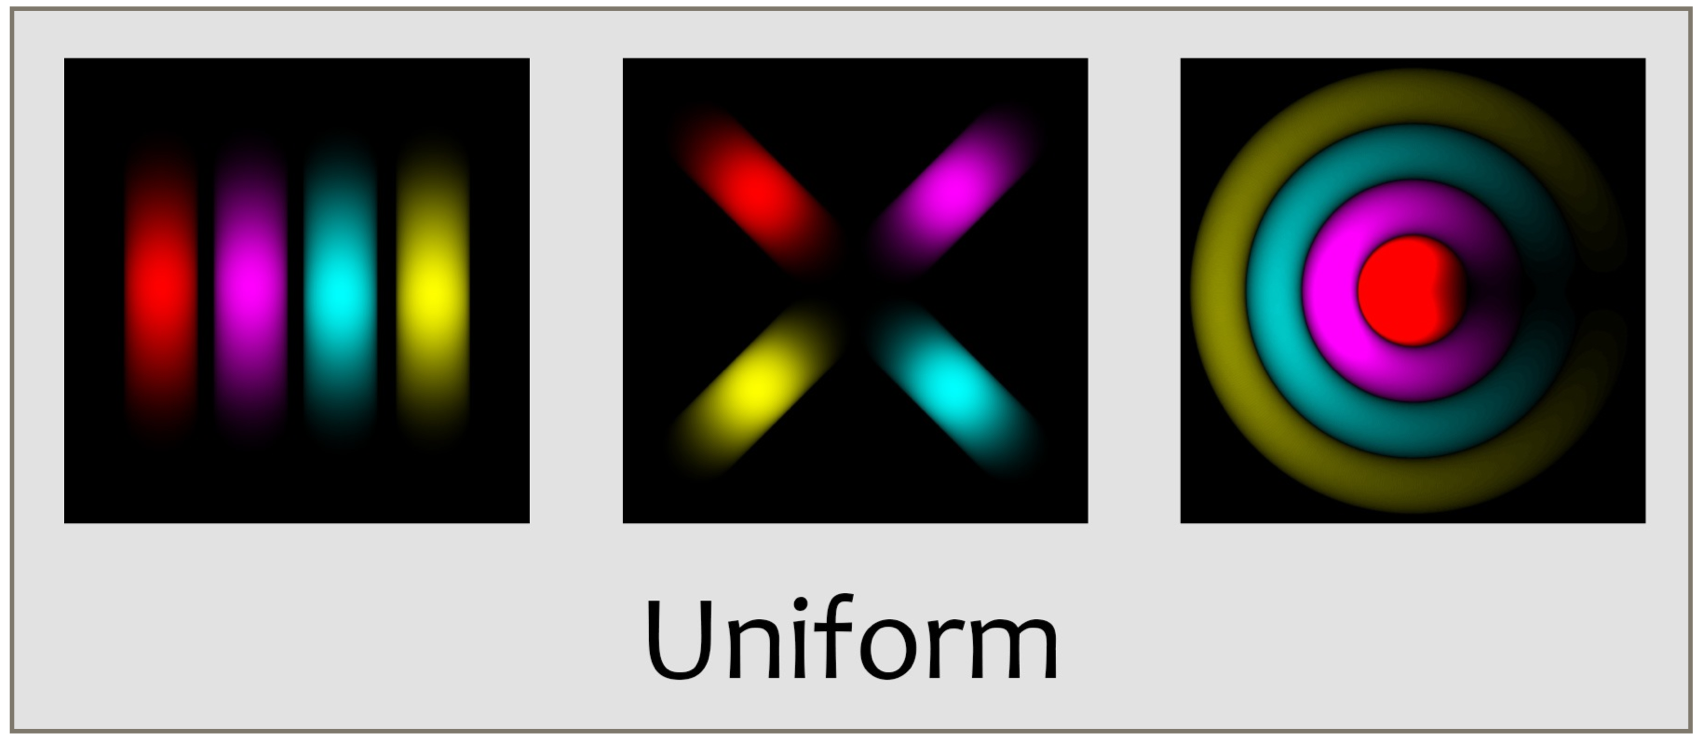 Results for the Uniform Shutter